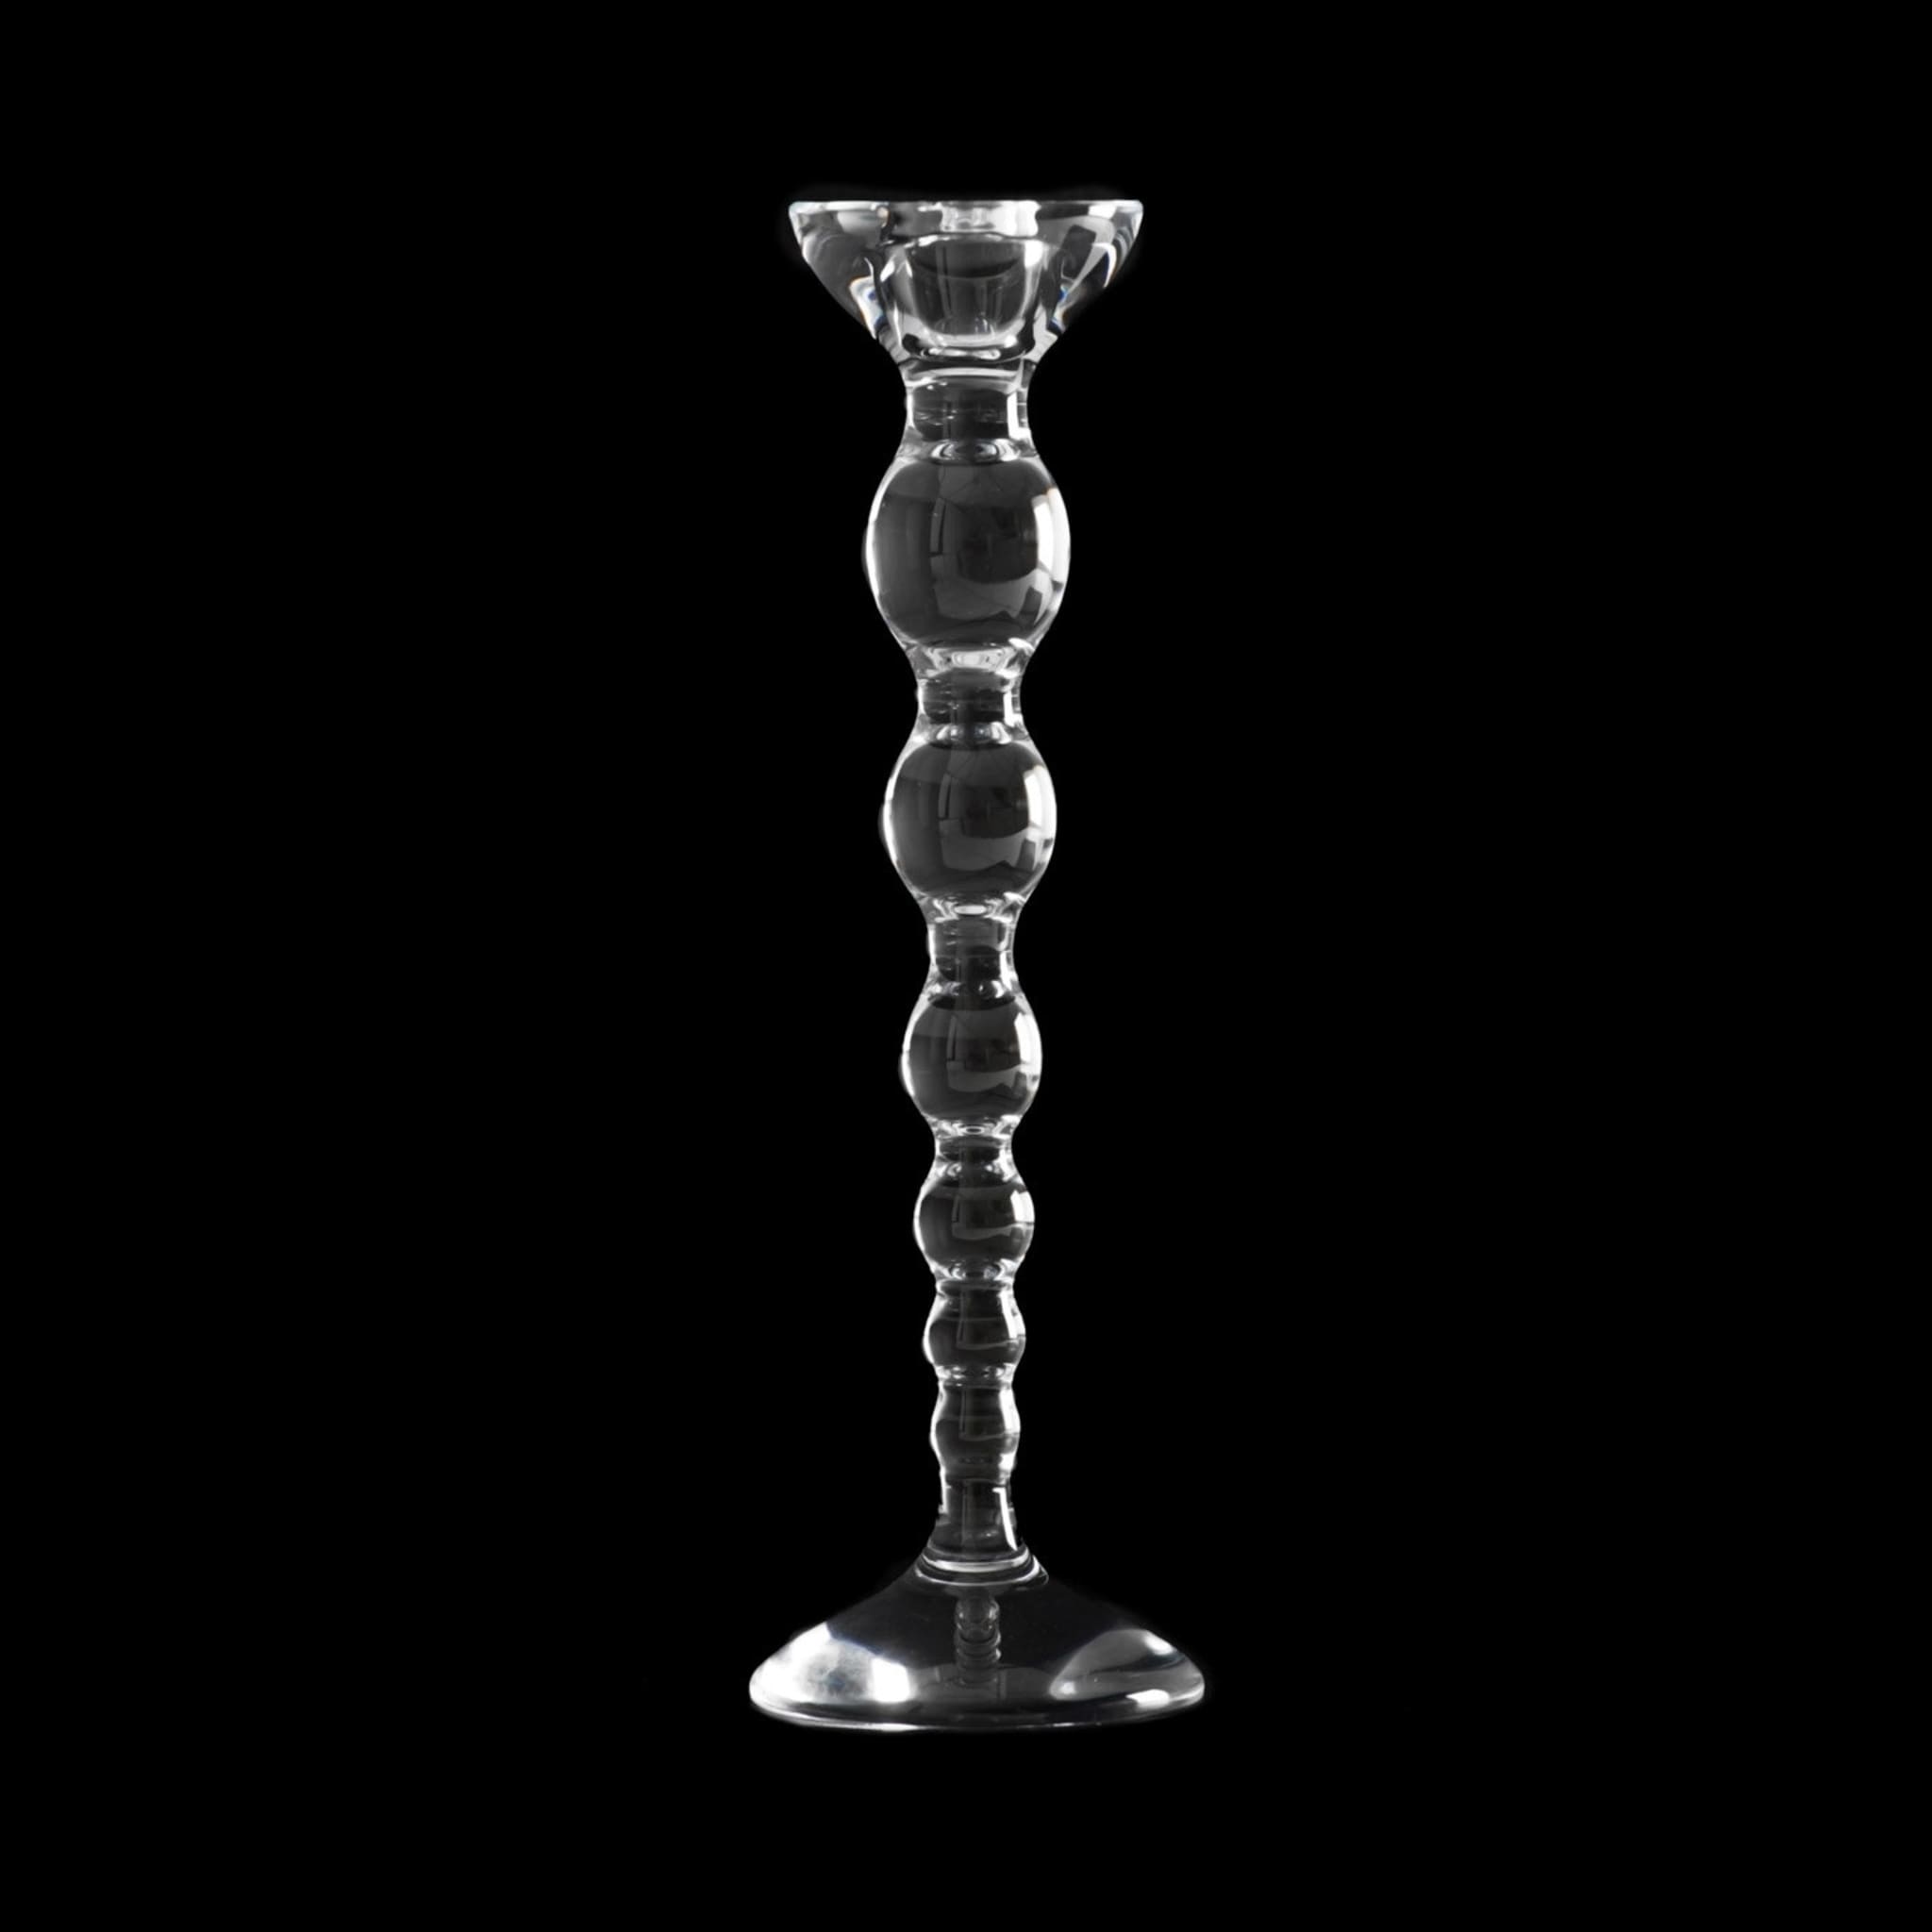 Collier Crystal Candle Holder - Alternative view 2